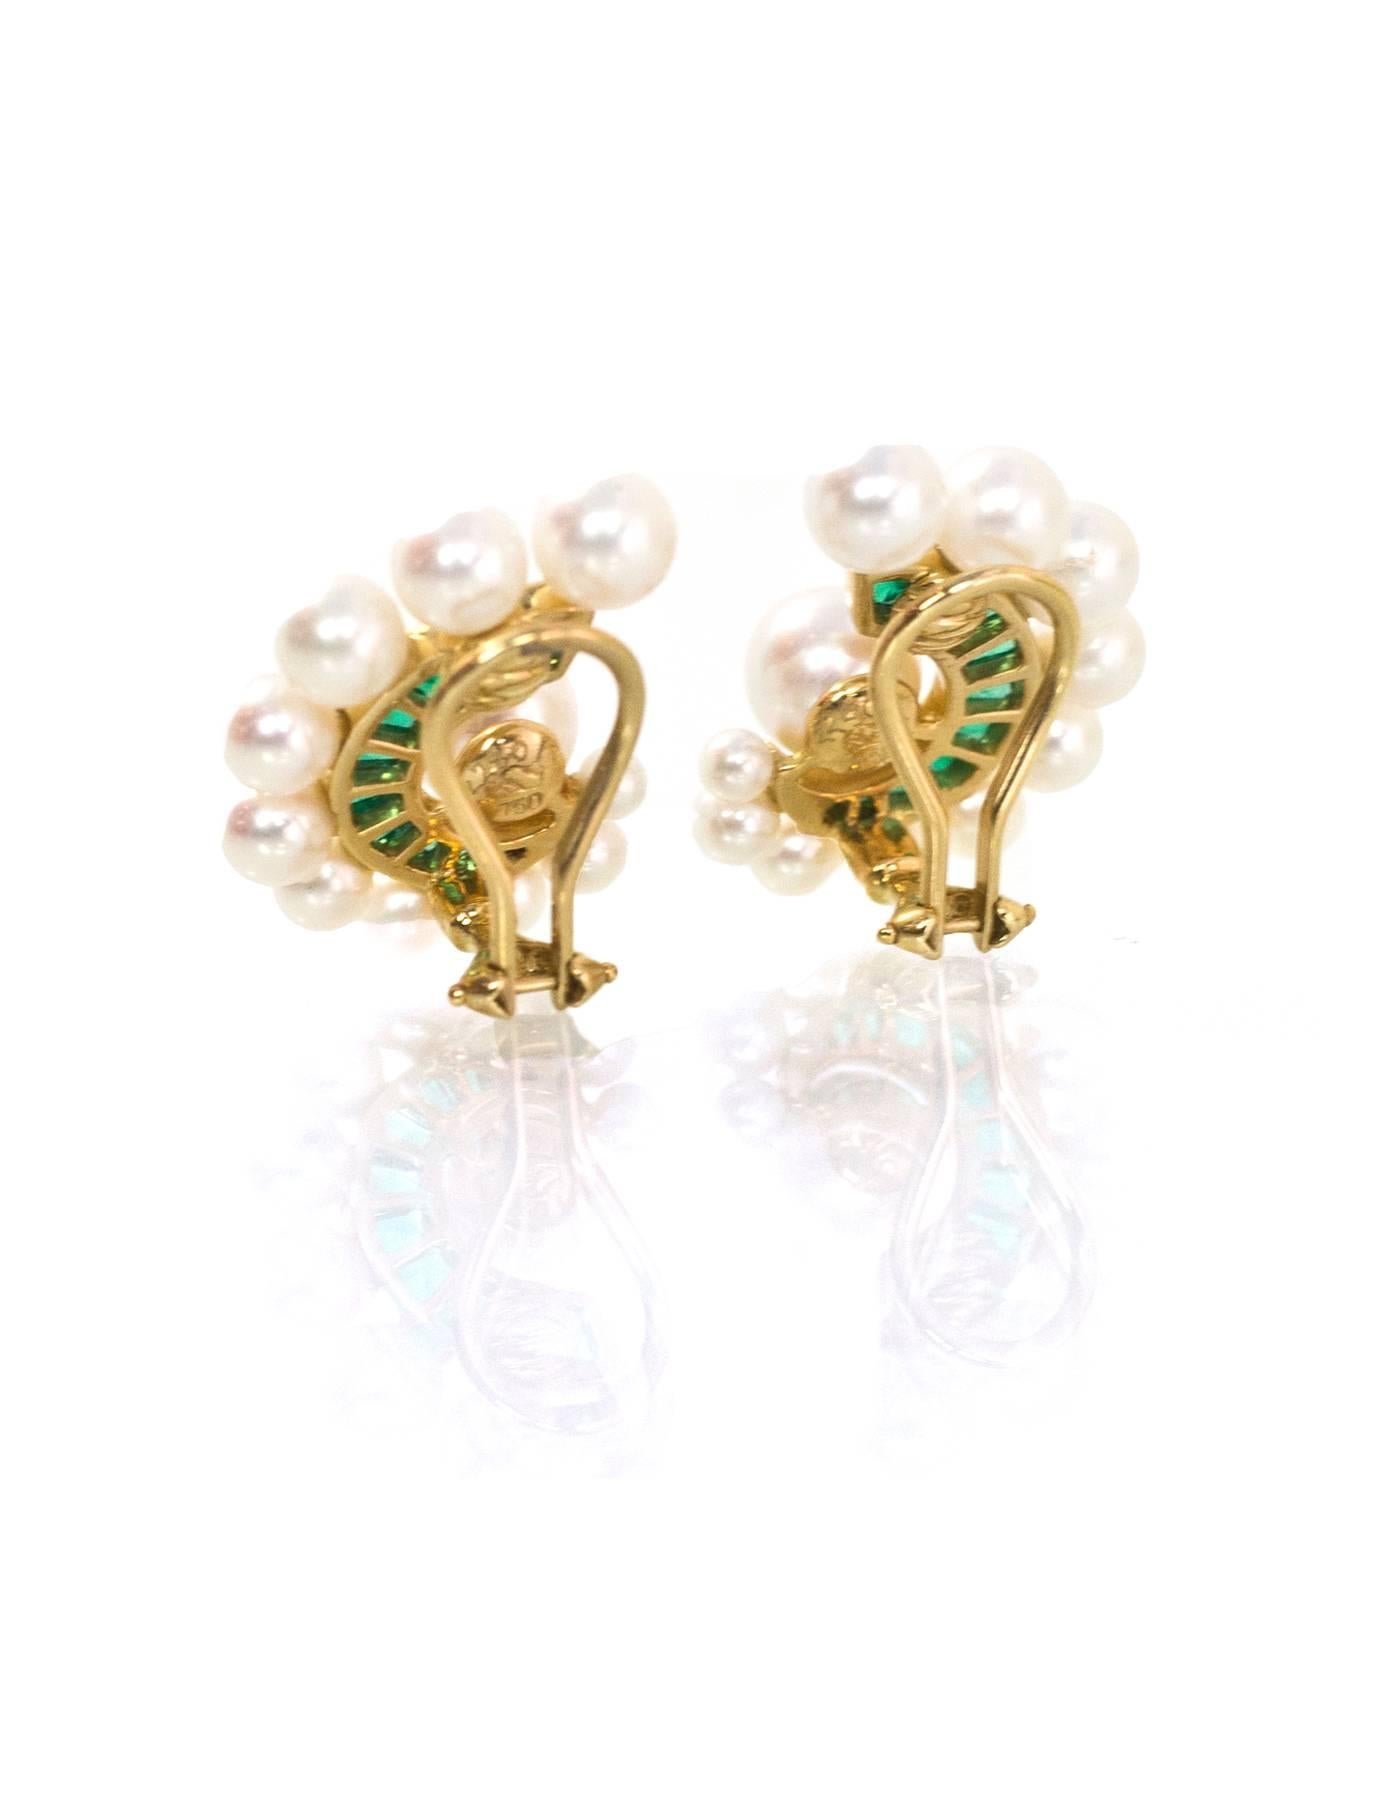 Seaman Schepps 18k Gold, Pearl & Emerald Clip-On Earrings

Color: White, gold, green
Materials: Pearls, 18k yellow gold, emeralds
Closure: Clip-on
Overall Condition: Excellent pre-owned condition
Included: Seaman Schepps Case, box

Measurements: